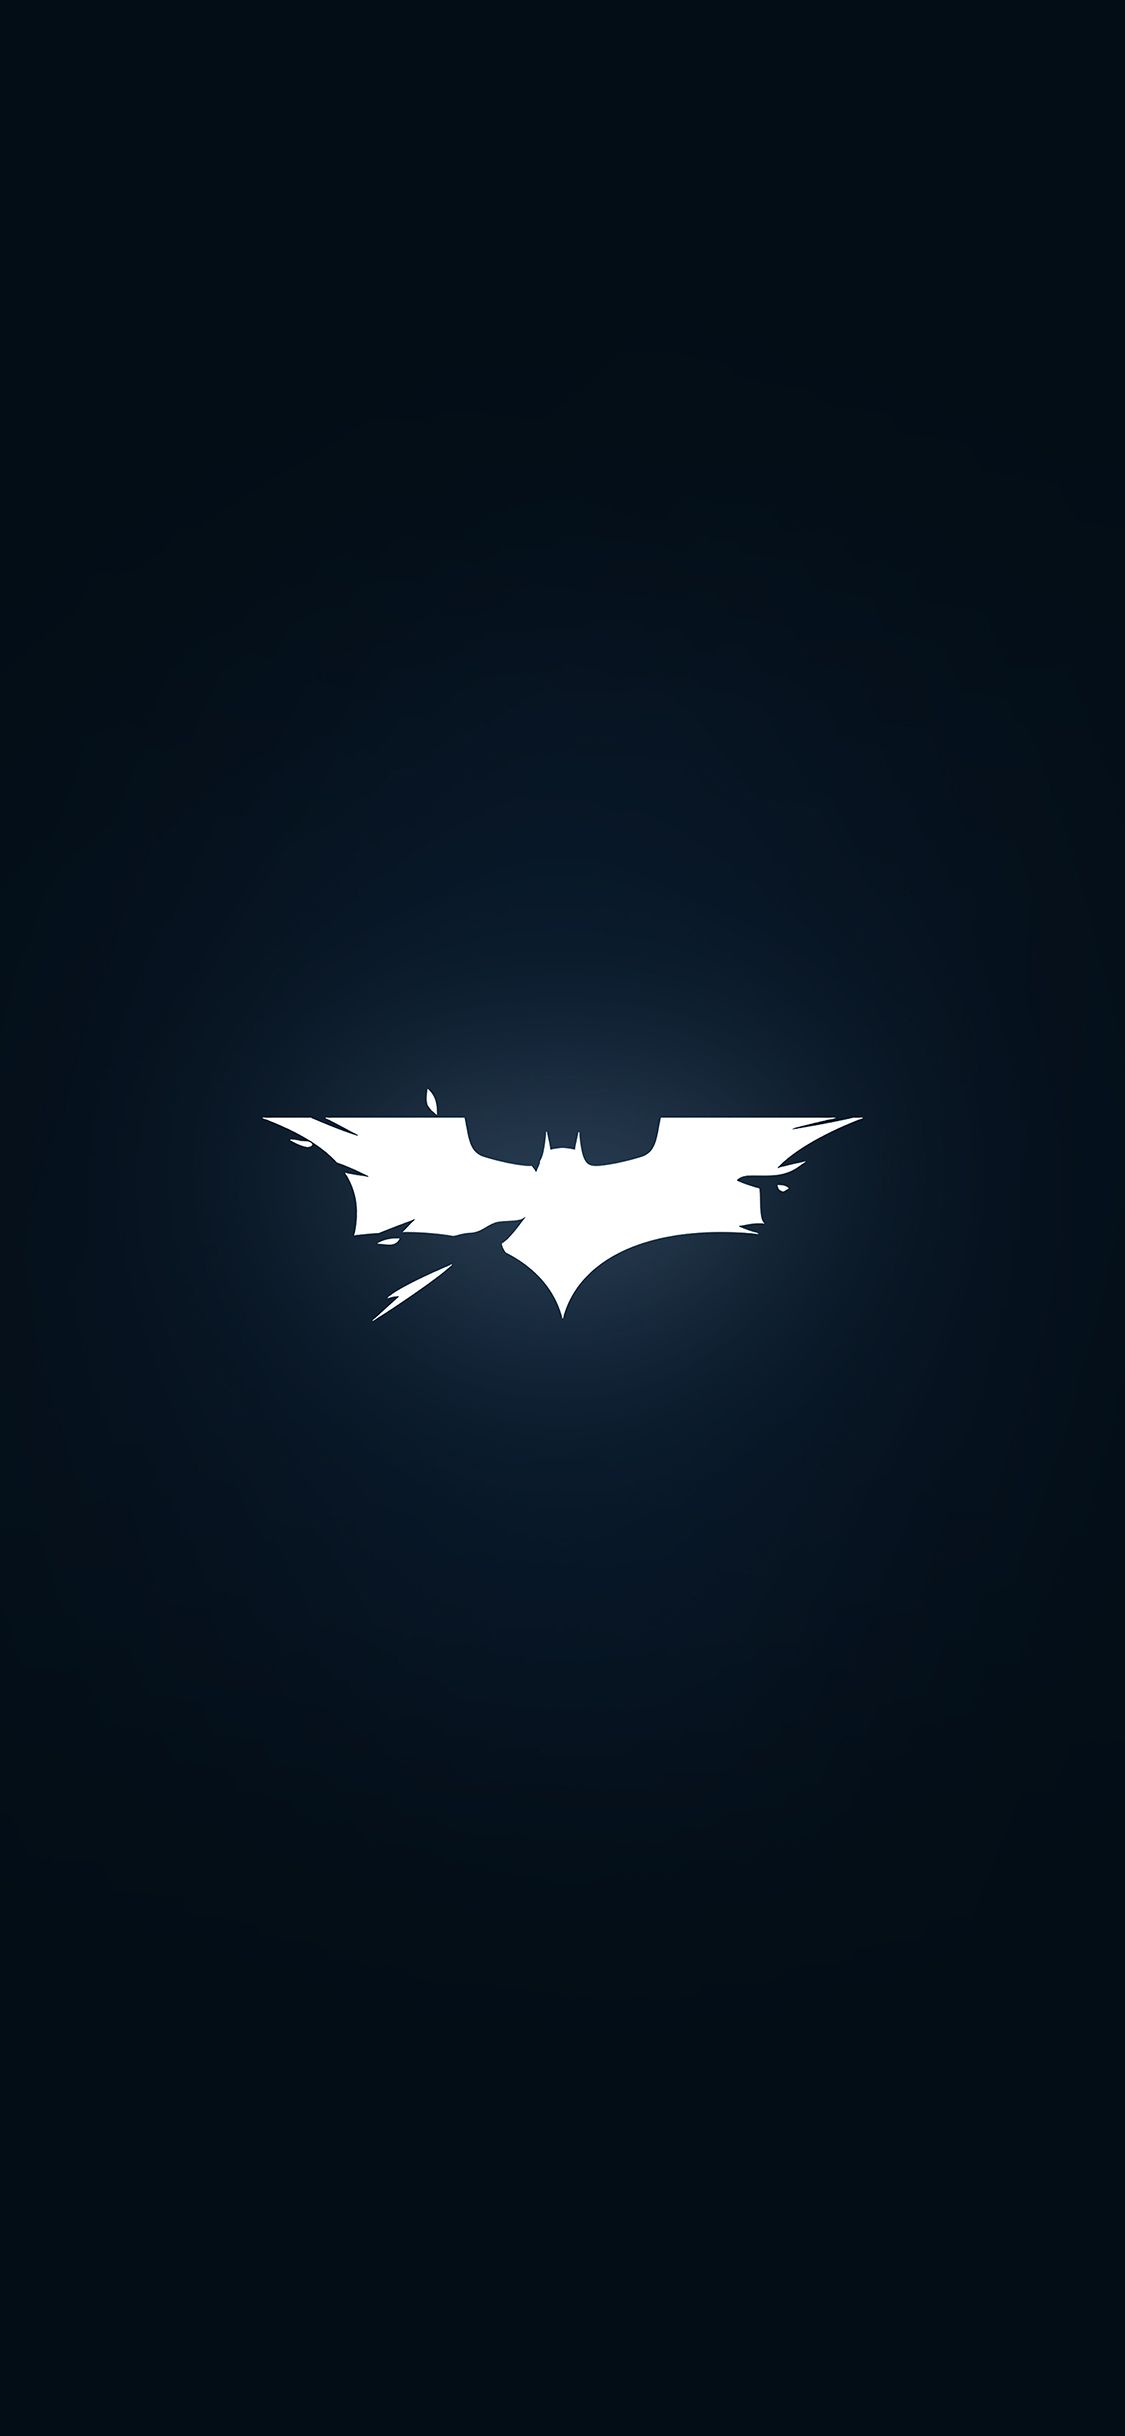 Batman Wallpaper for iPhone 11, Pro Max, X, 8, 7, 6 - Free Download on  3Wallpapers